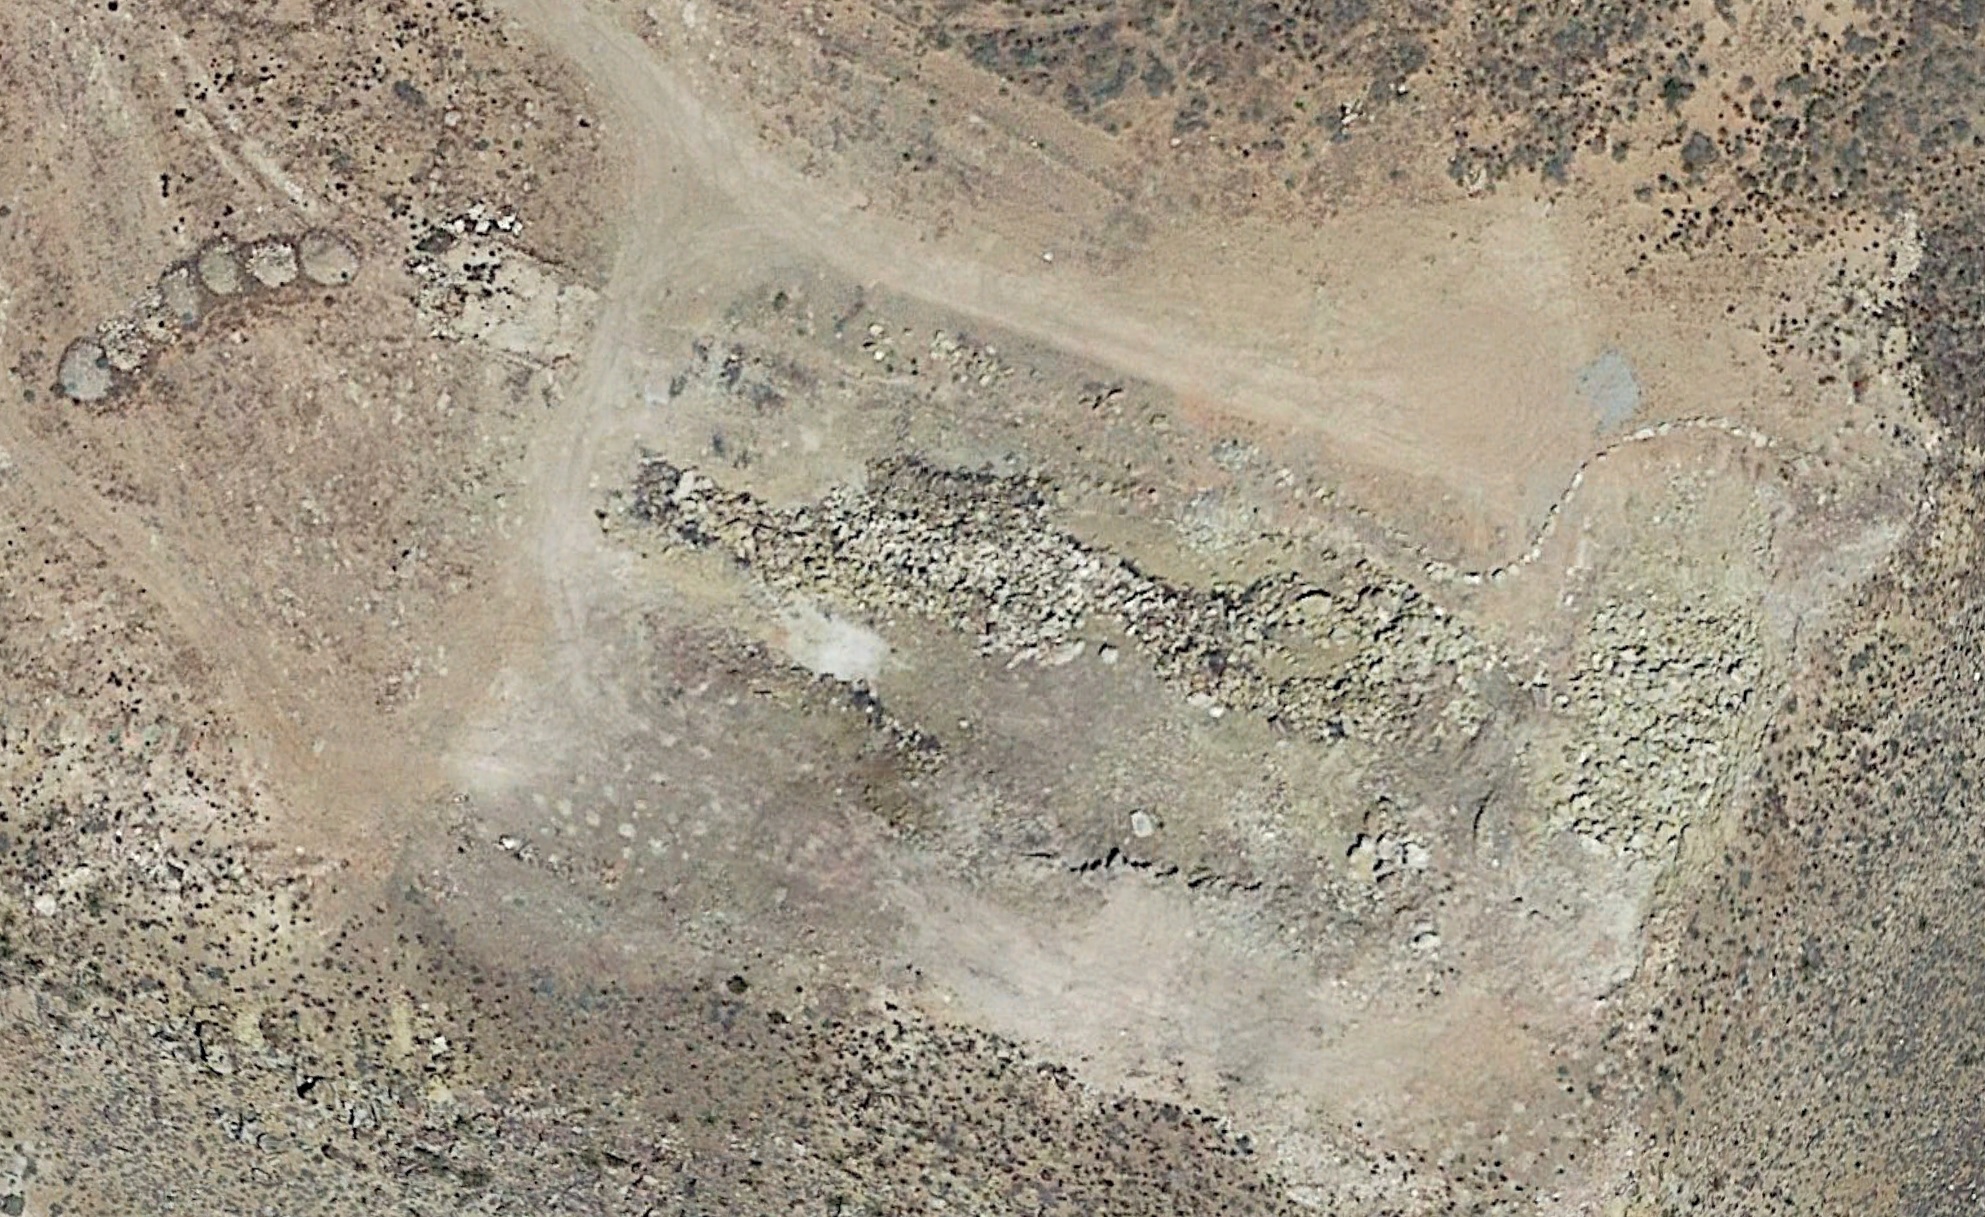 Aerial view of the dump